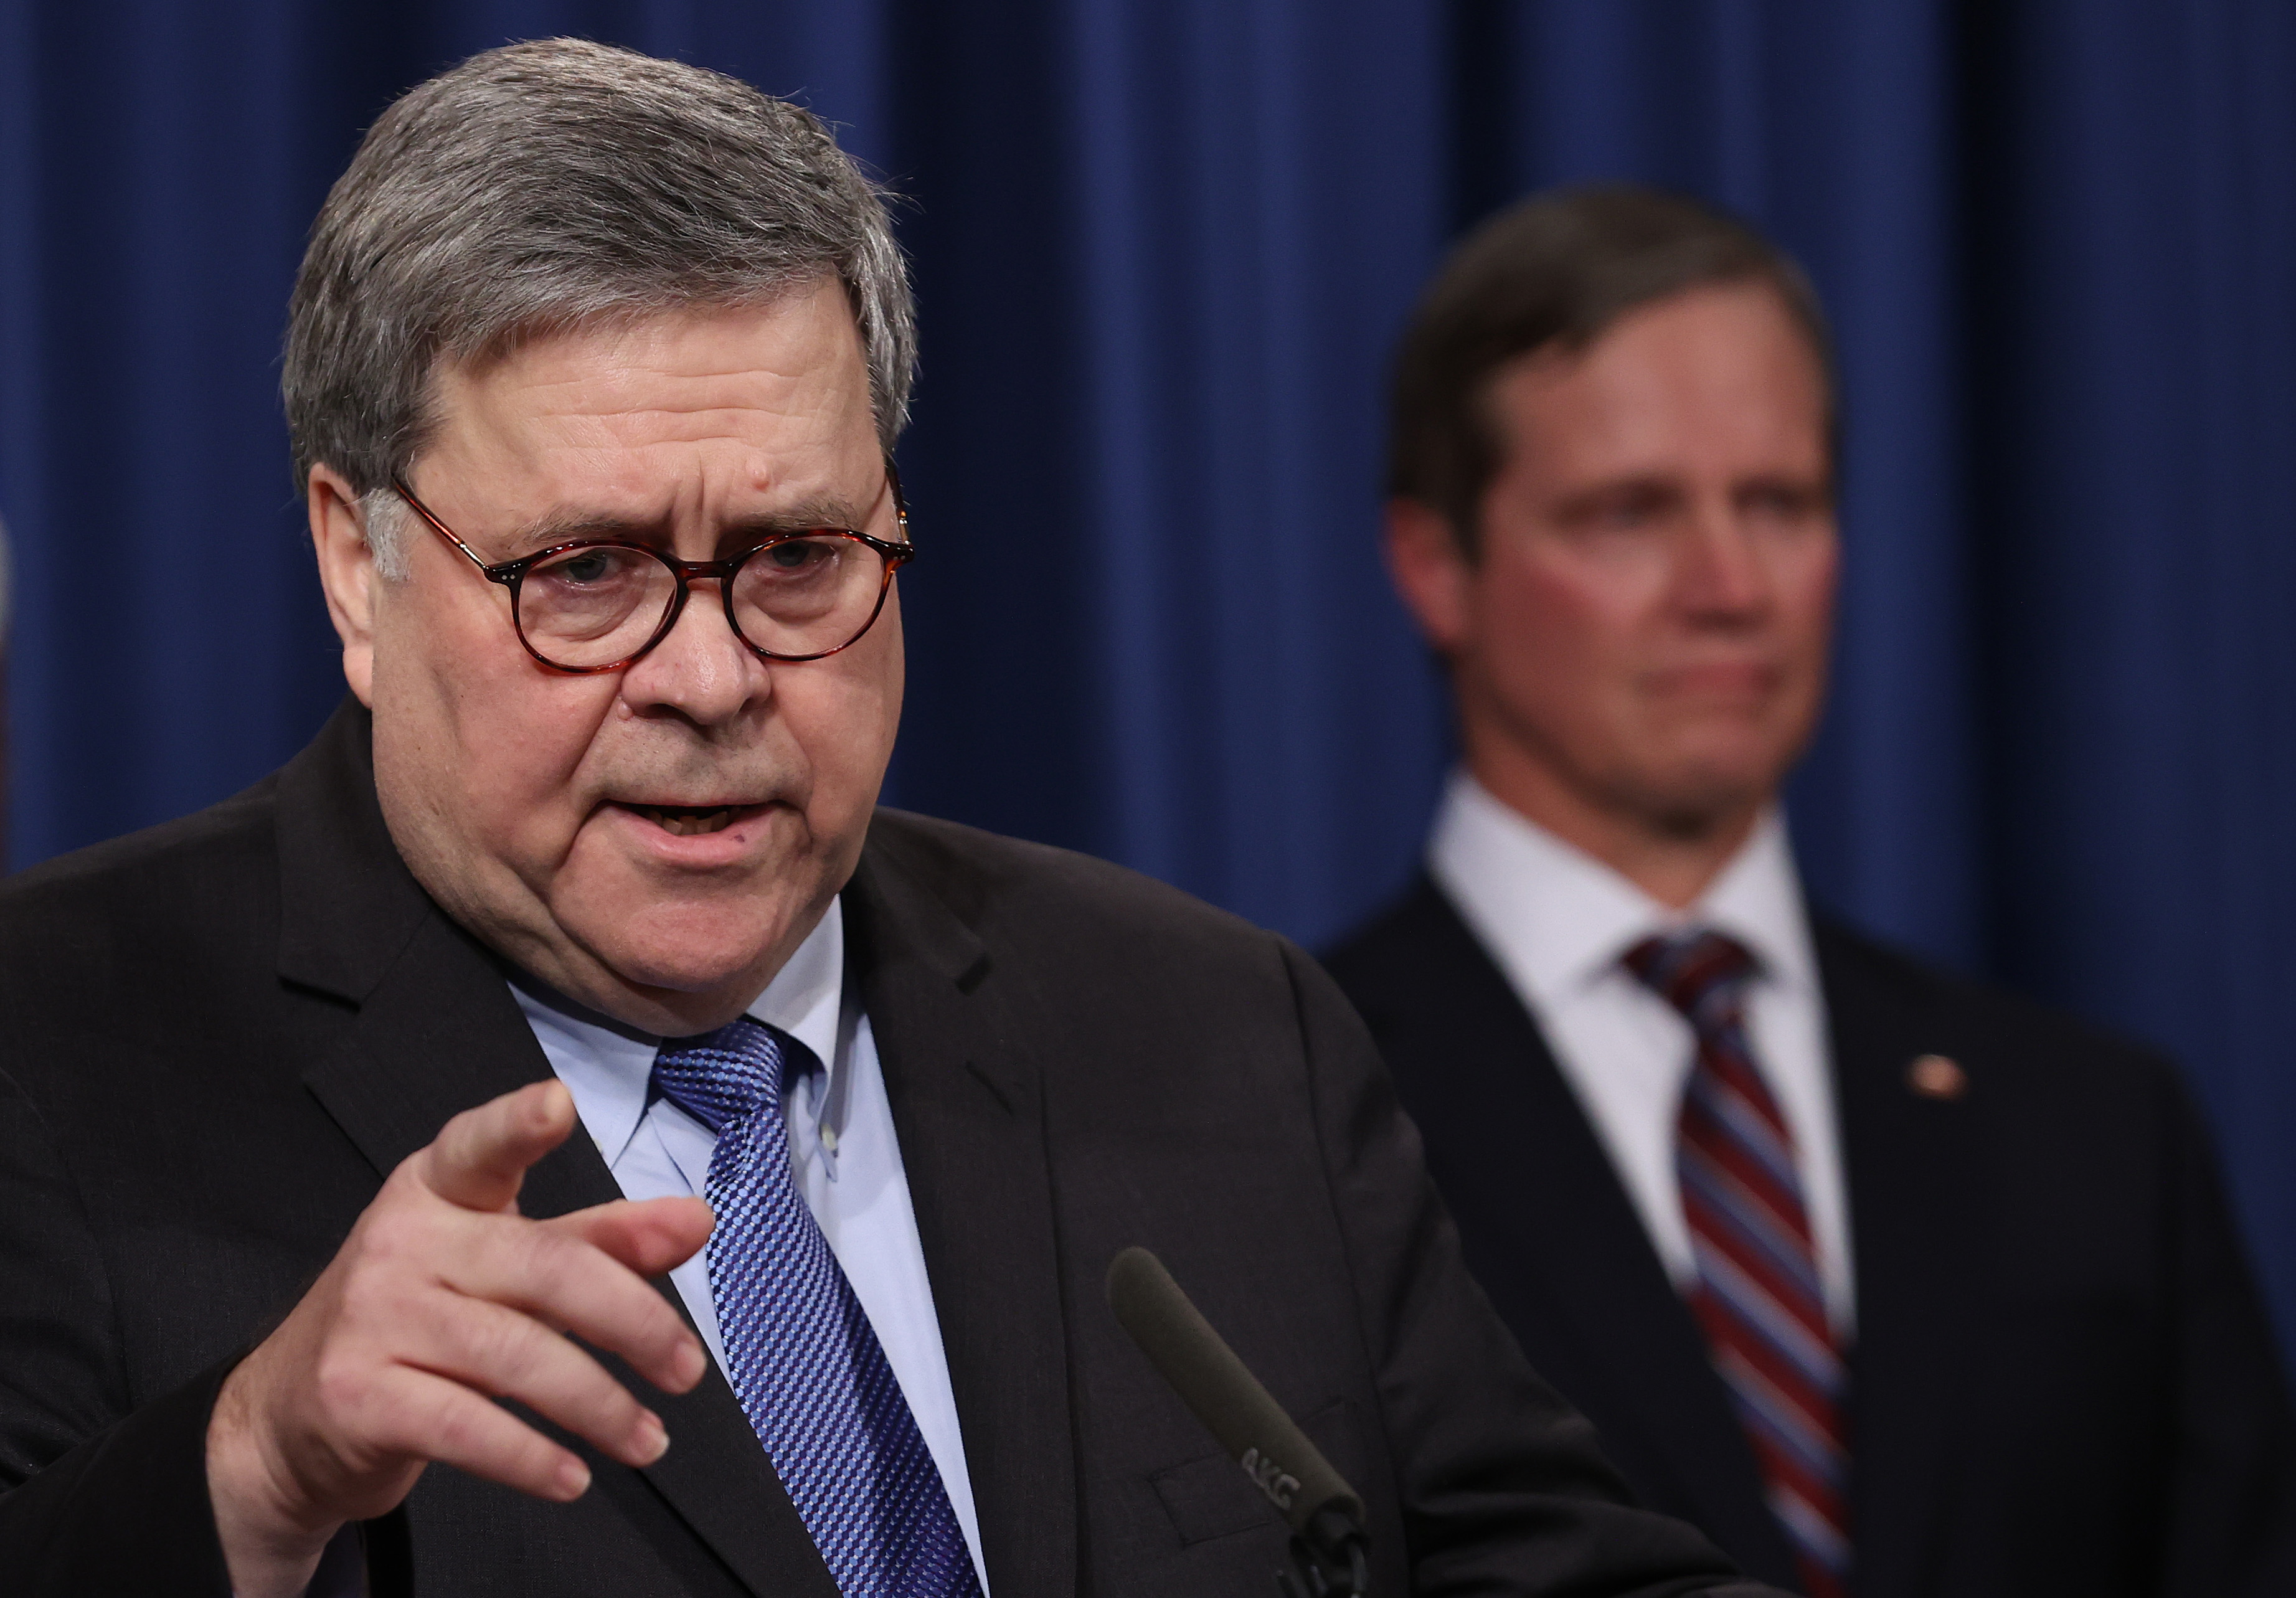 Attorney General William Barr speaks during a press conference on January 13, 2020. (Win McNamee/Getty Images)